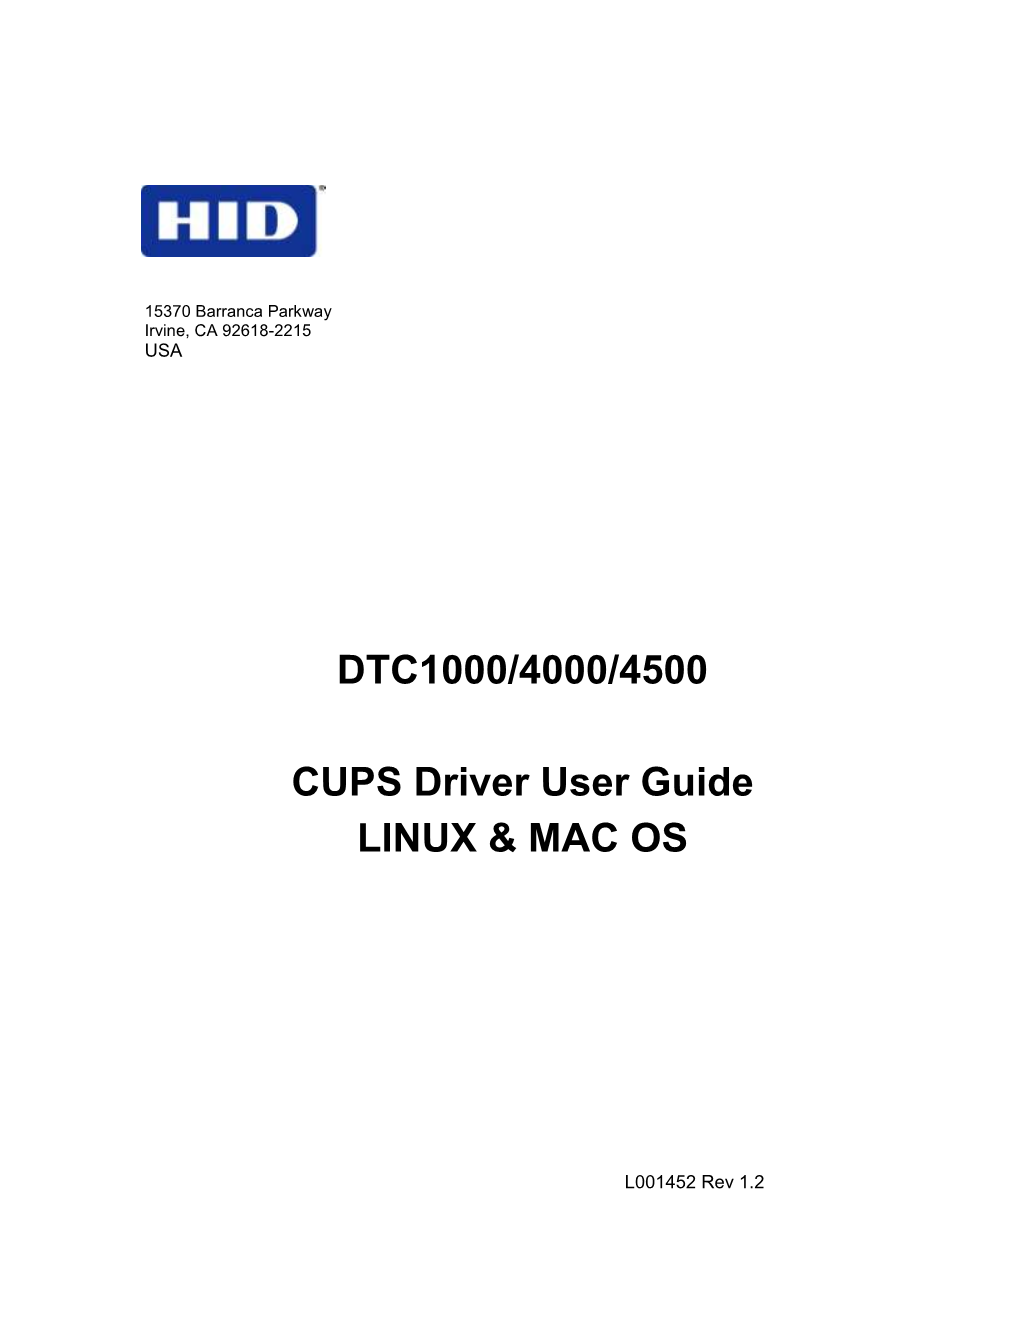 CUPS Driver User Guide LINUX & MAC OS